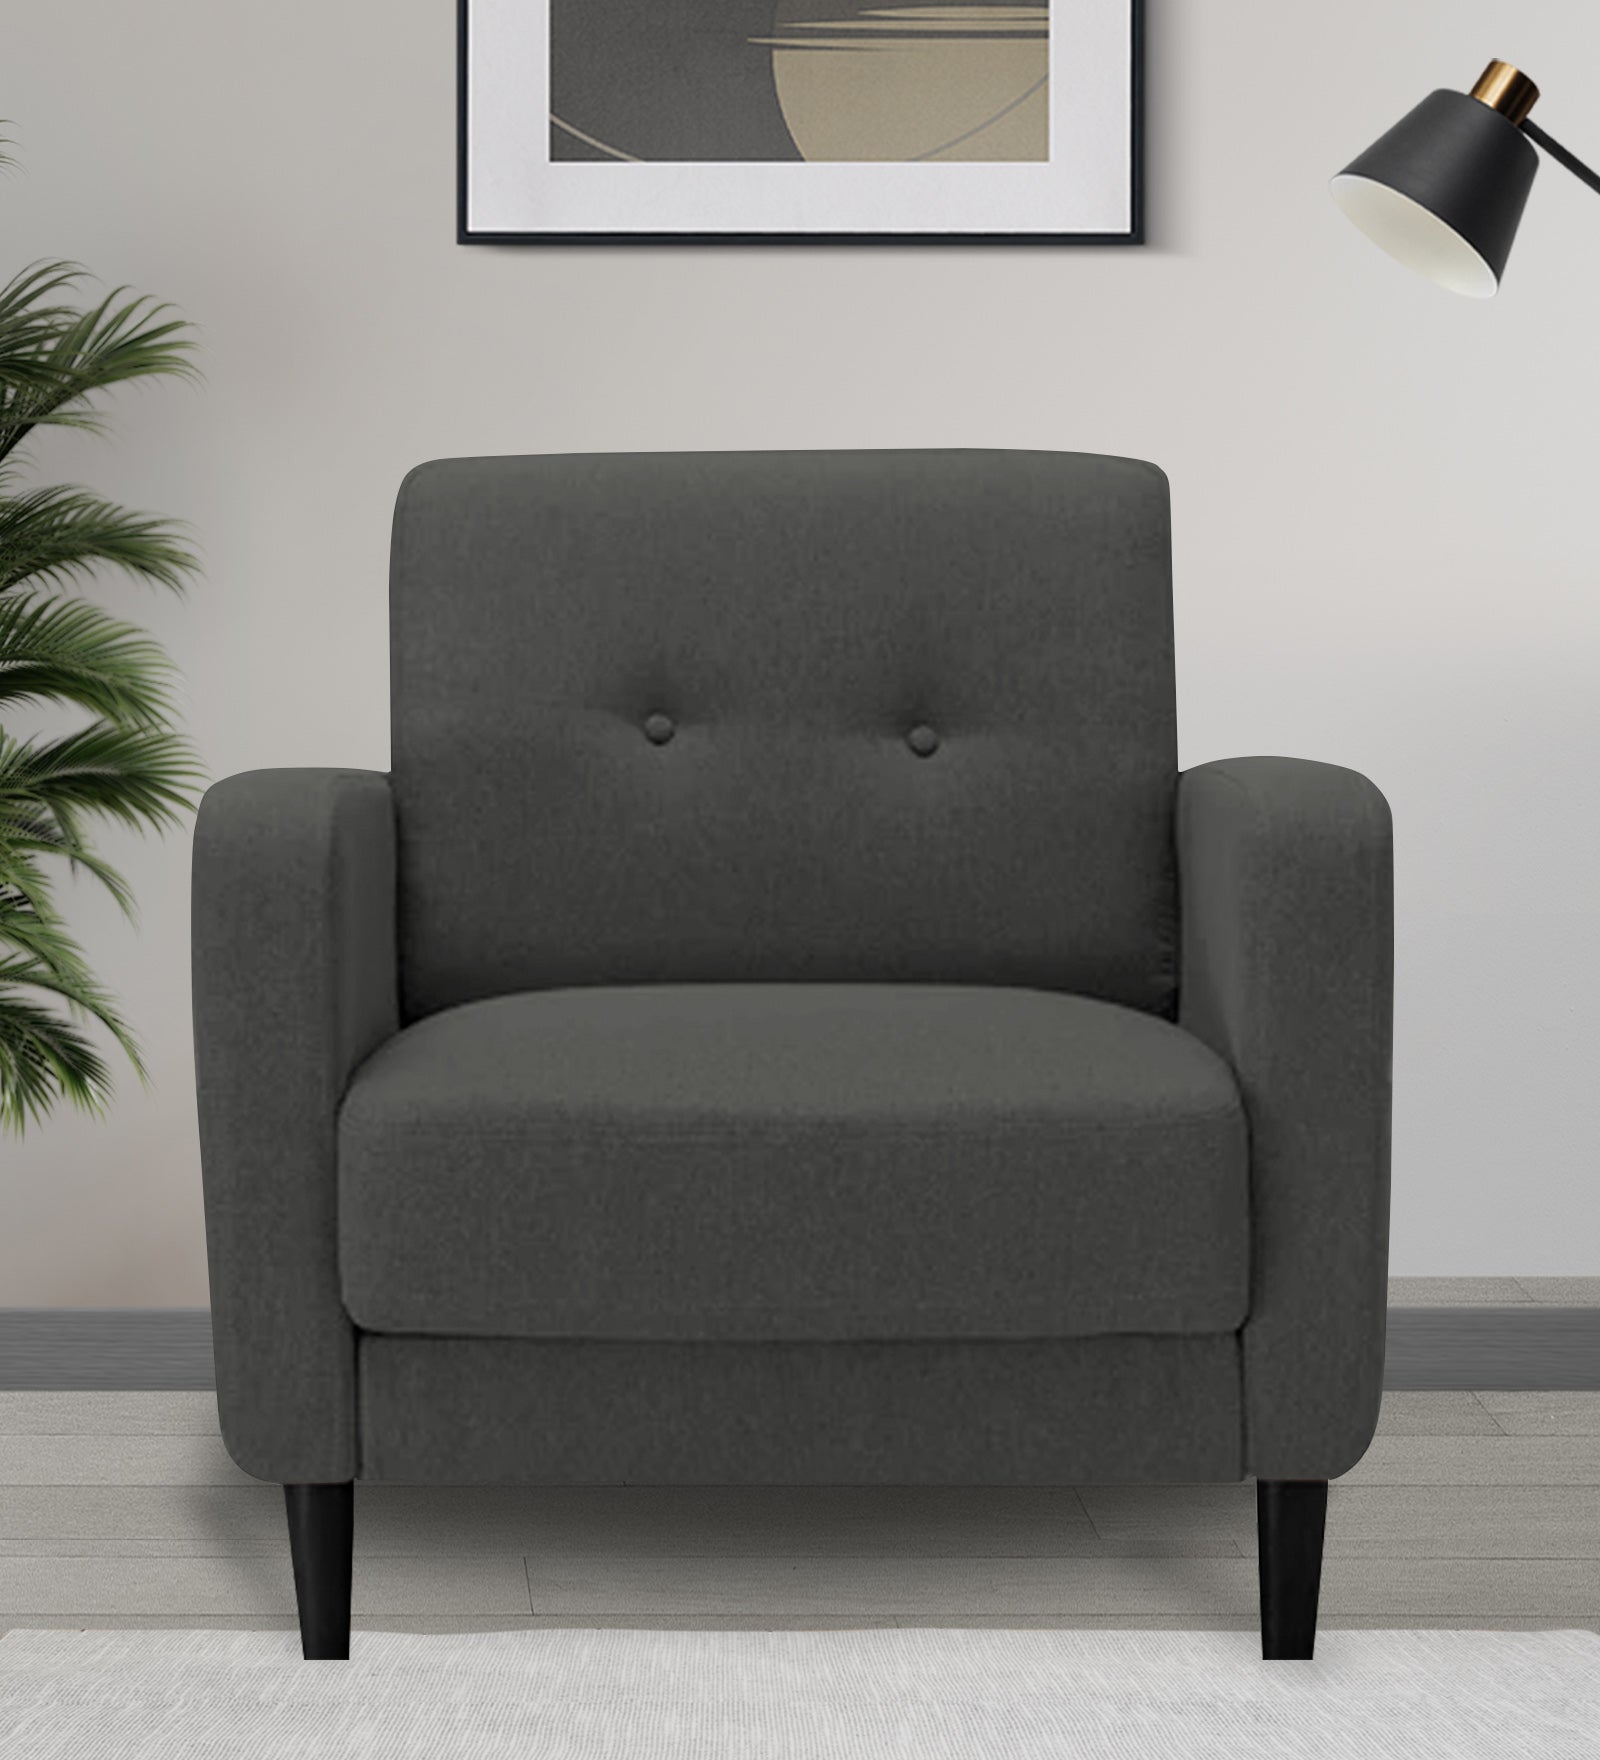 Marq Fabric 1 Seater Sofa in Charcoal Grey Colour